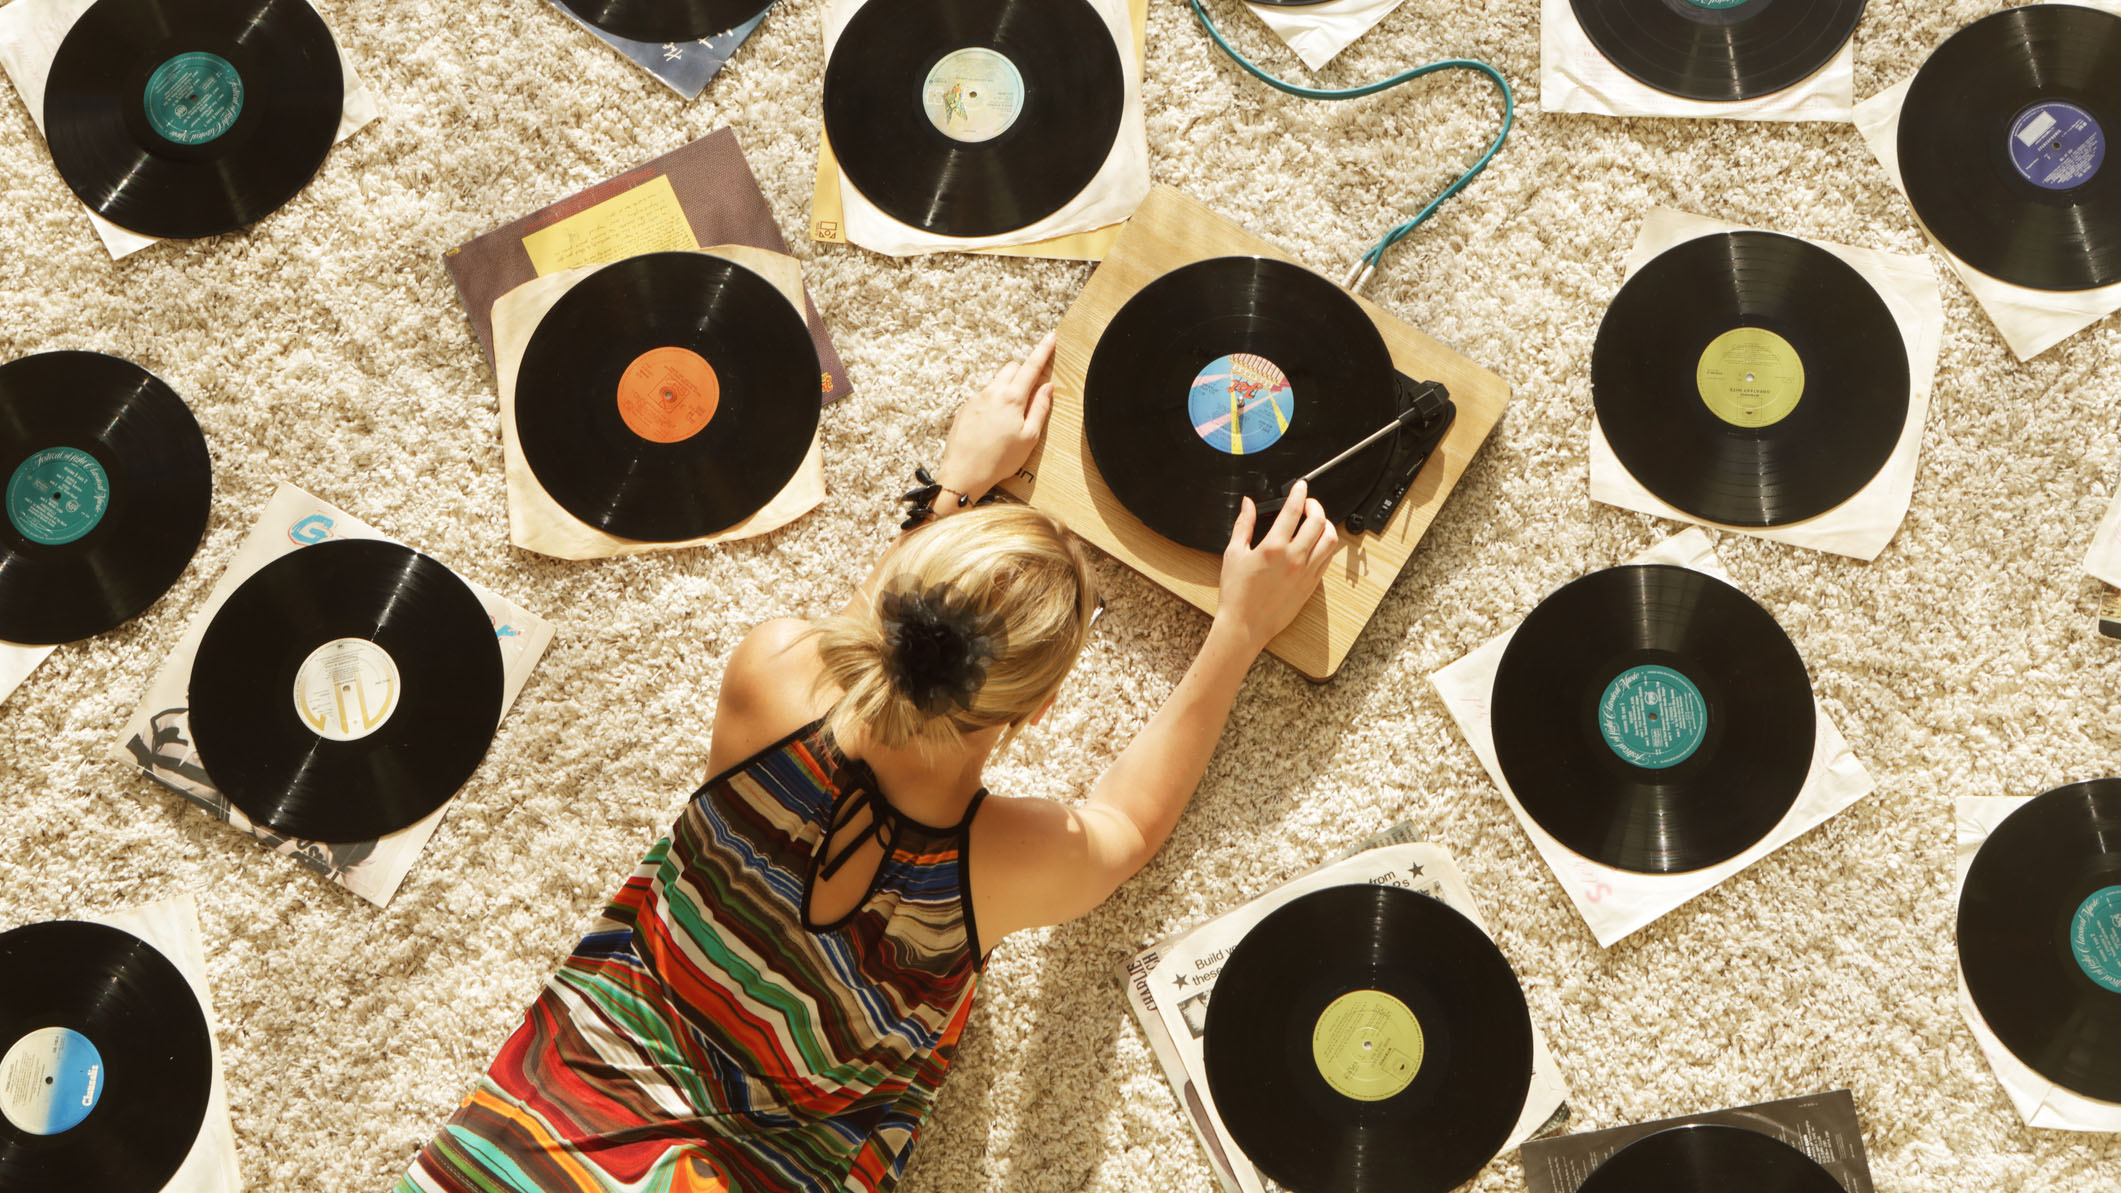 10 of the world's most valuable vinyl records and collectible